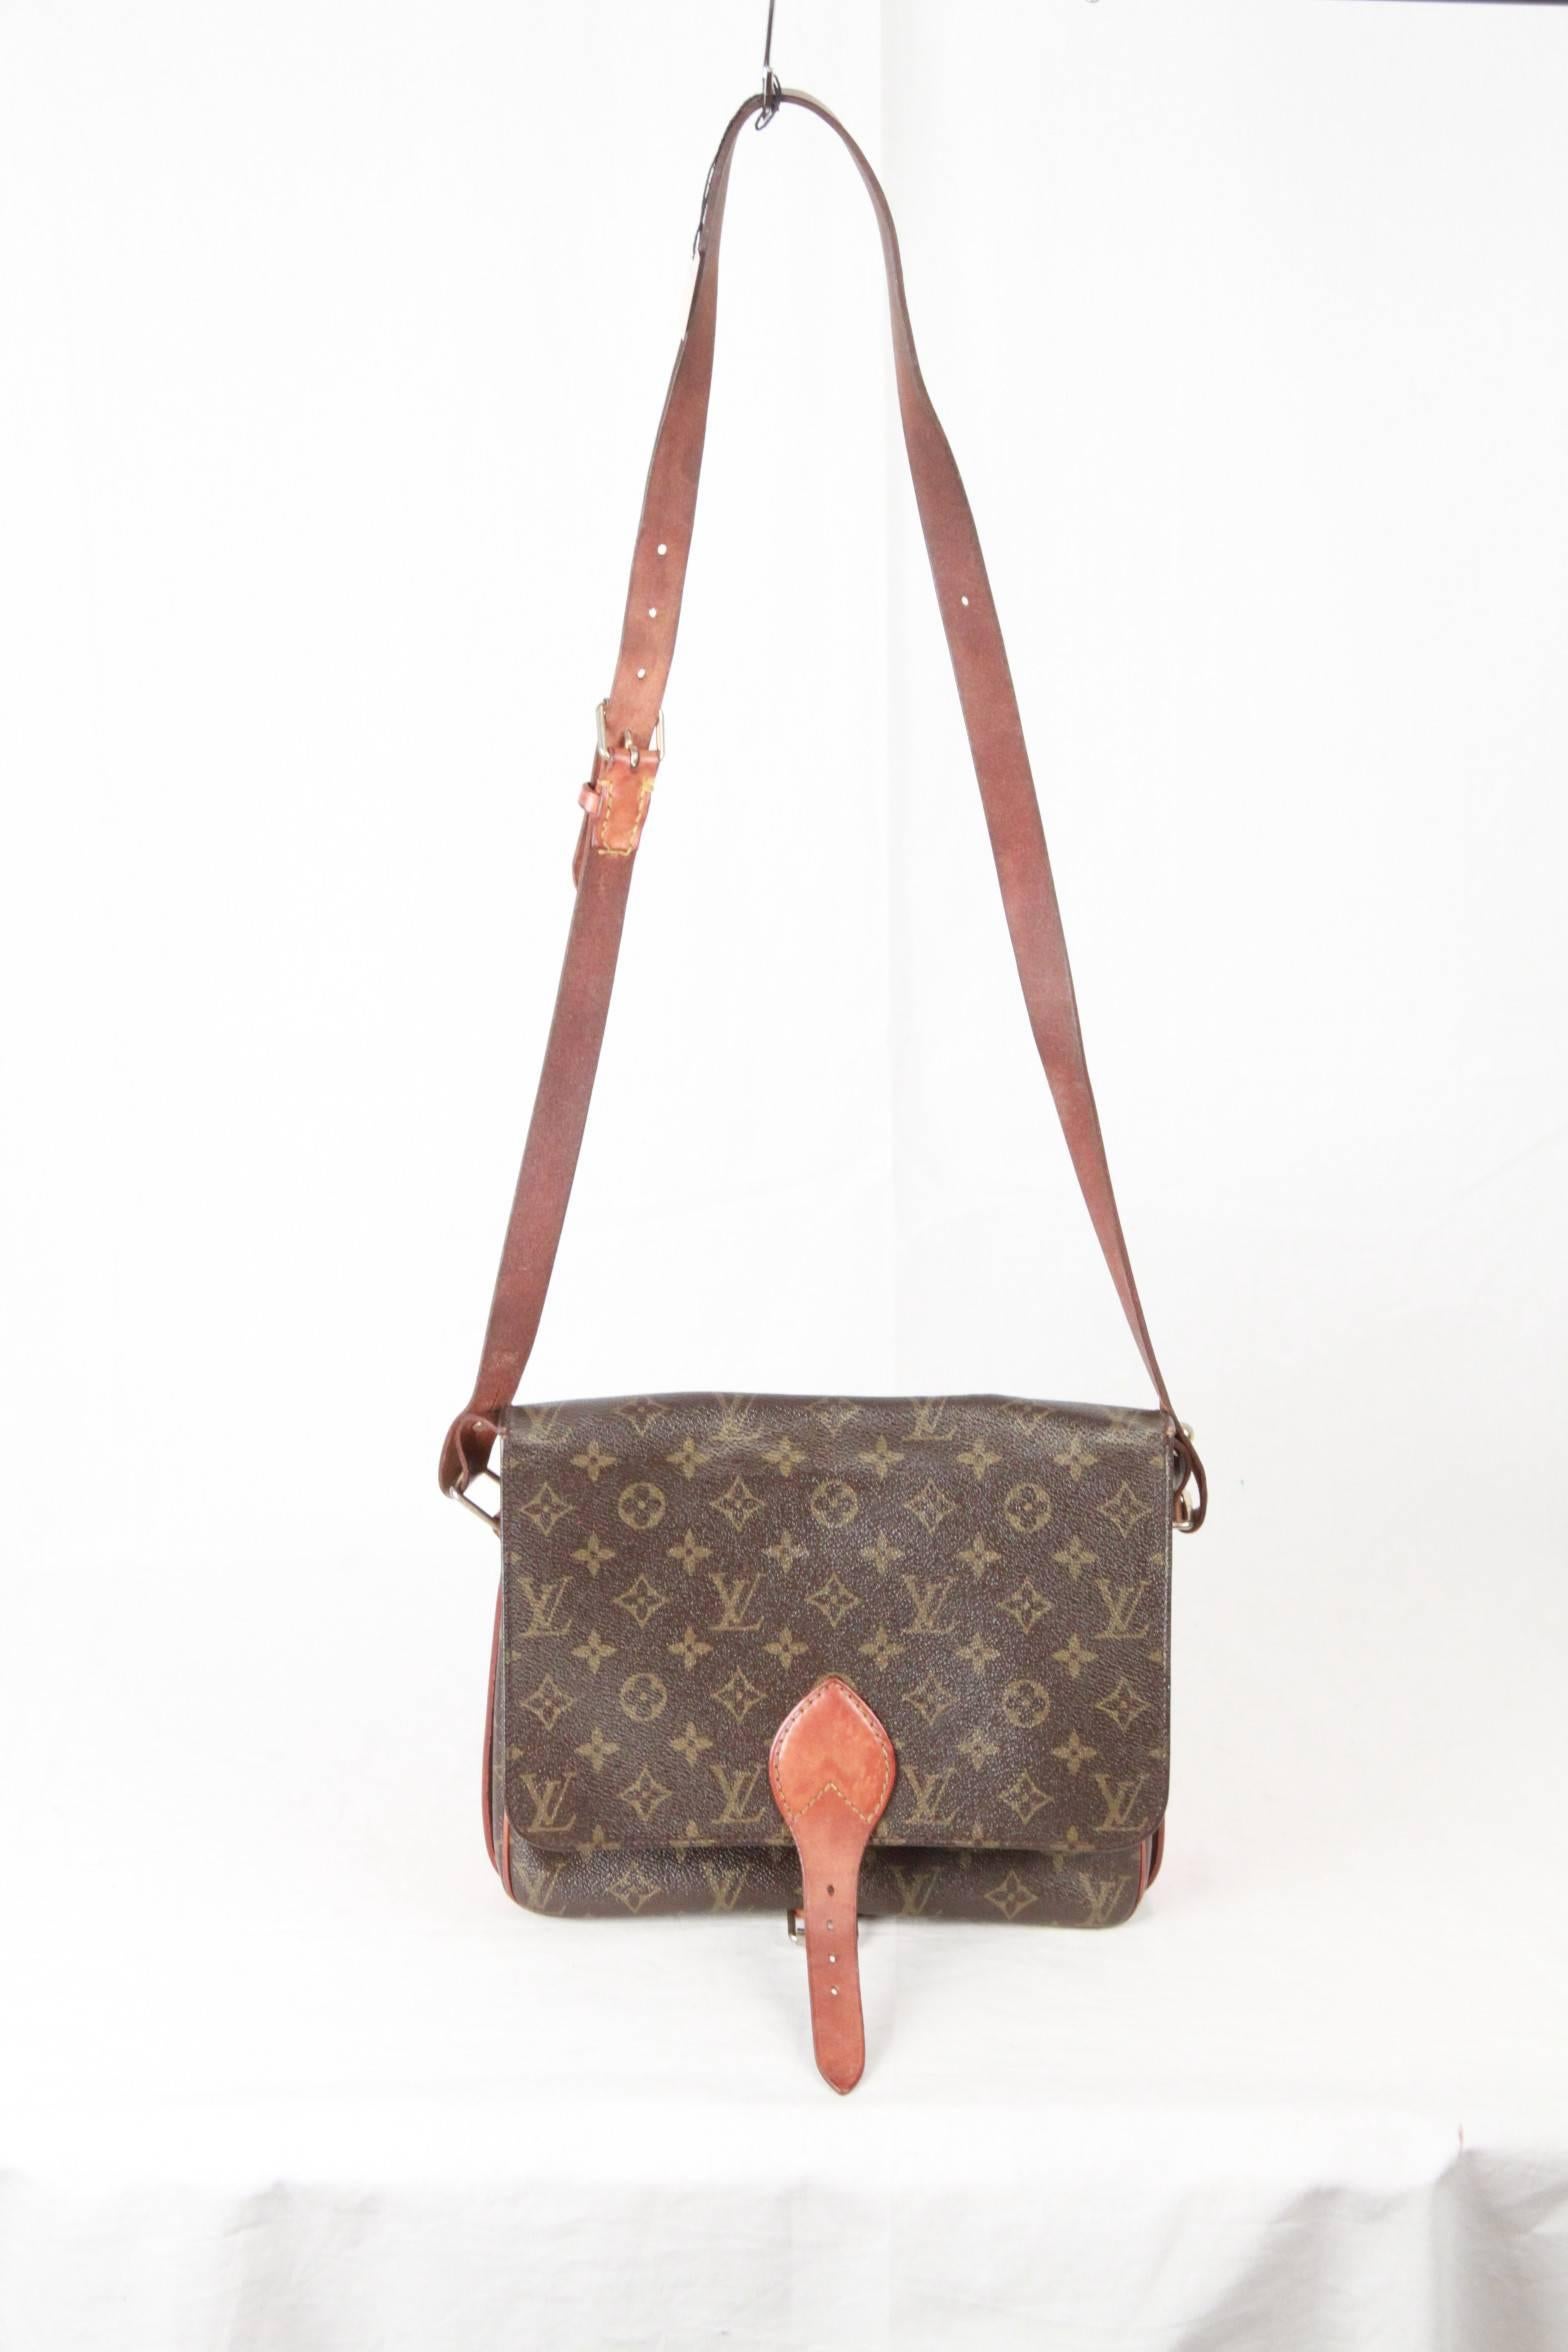 - Louis Vuitton Vintage Monogram Canvas Cartouchiere GM Bag
From 1983
- Brown Monogram Canvas with genuine leather trim
- It features a square shape with a flap top and buckle closure.
- Its interior in cross grain leather
- Divider in the bag